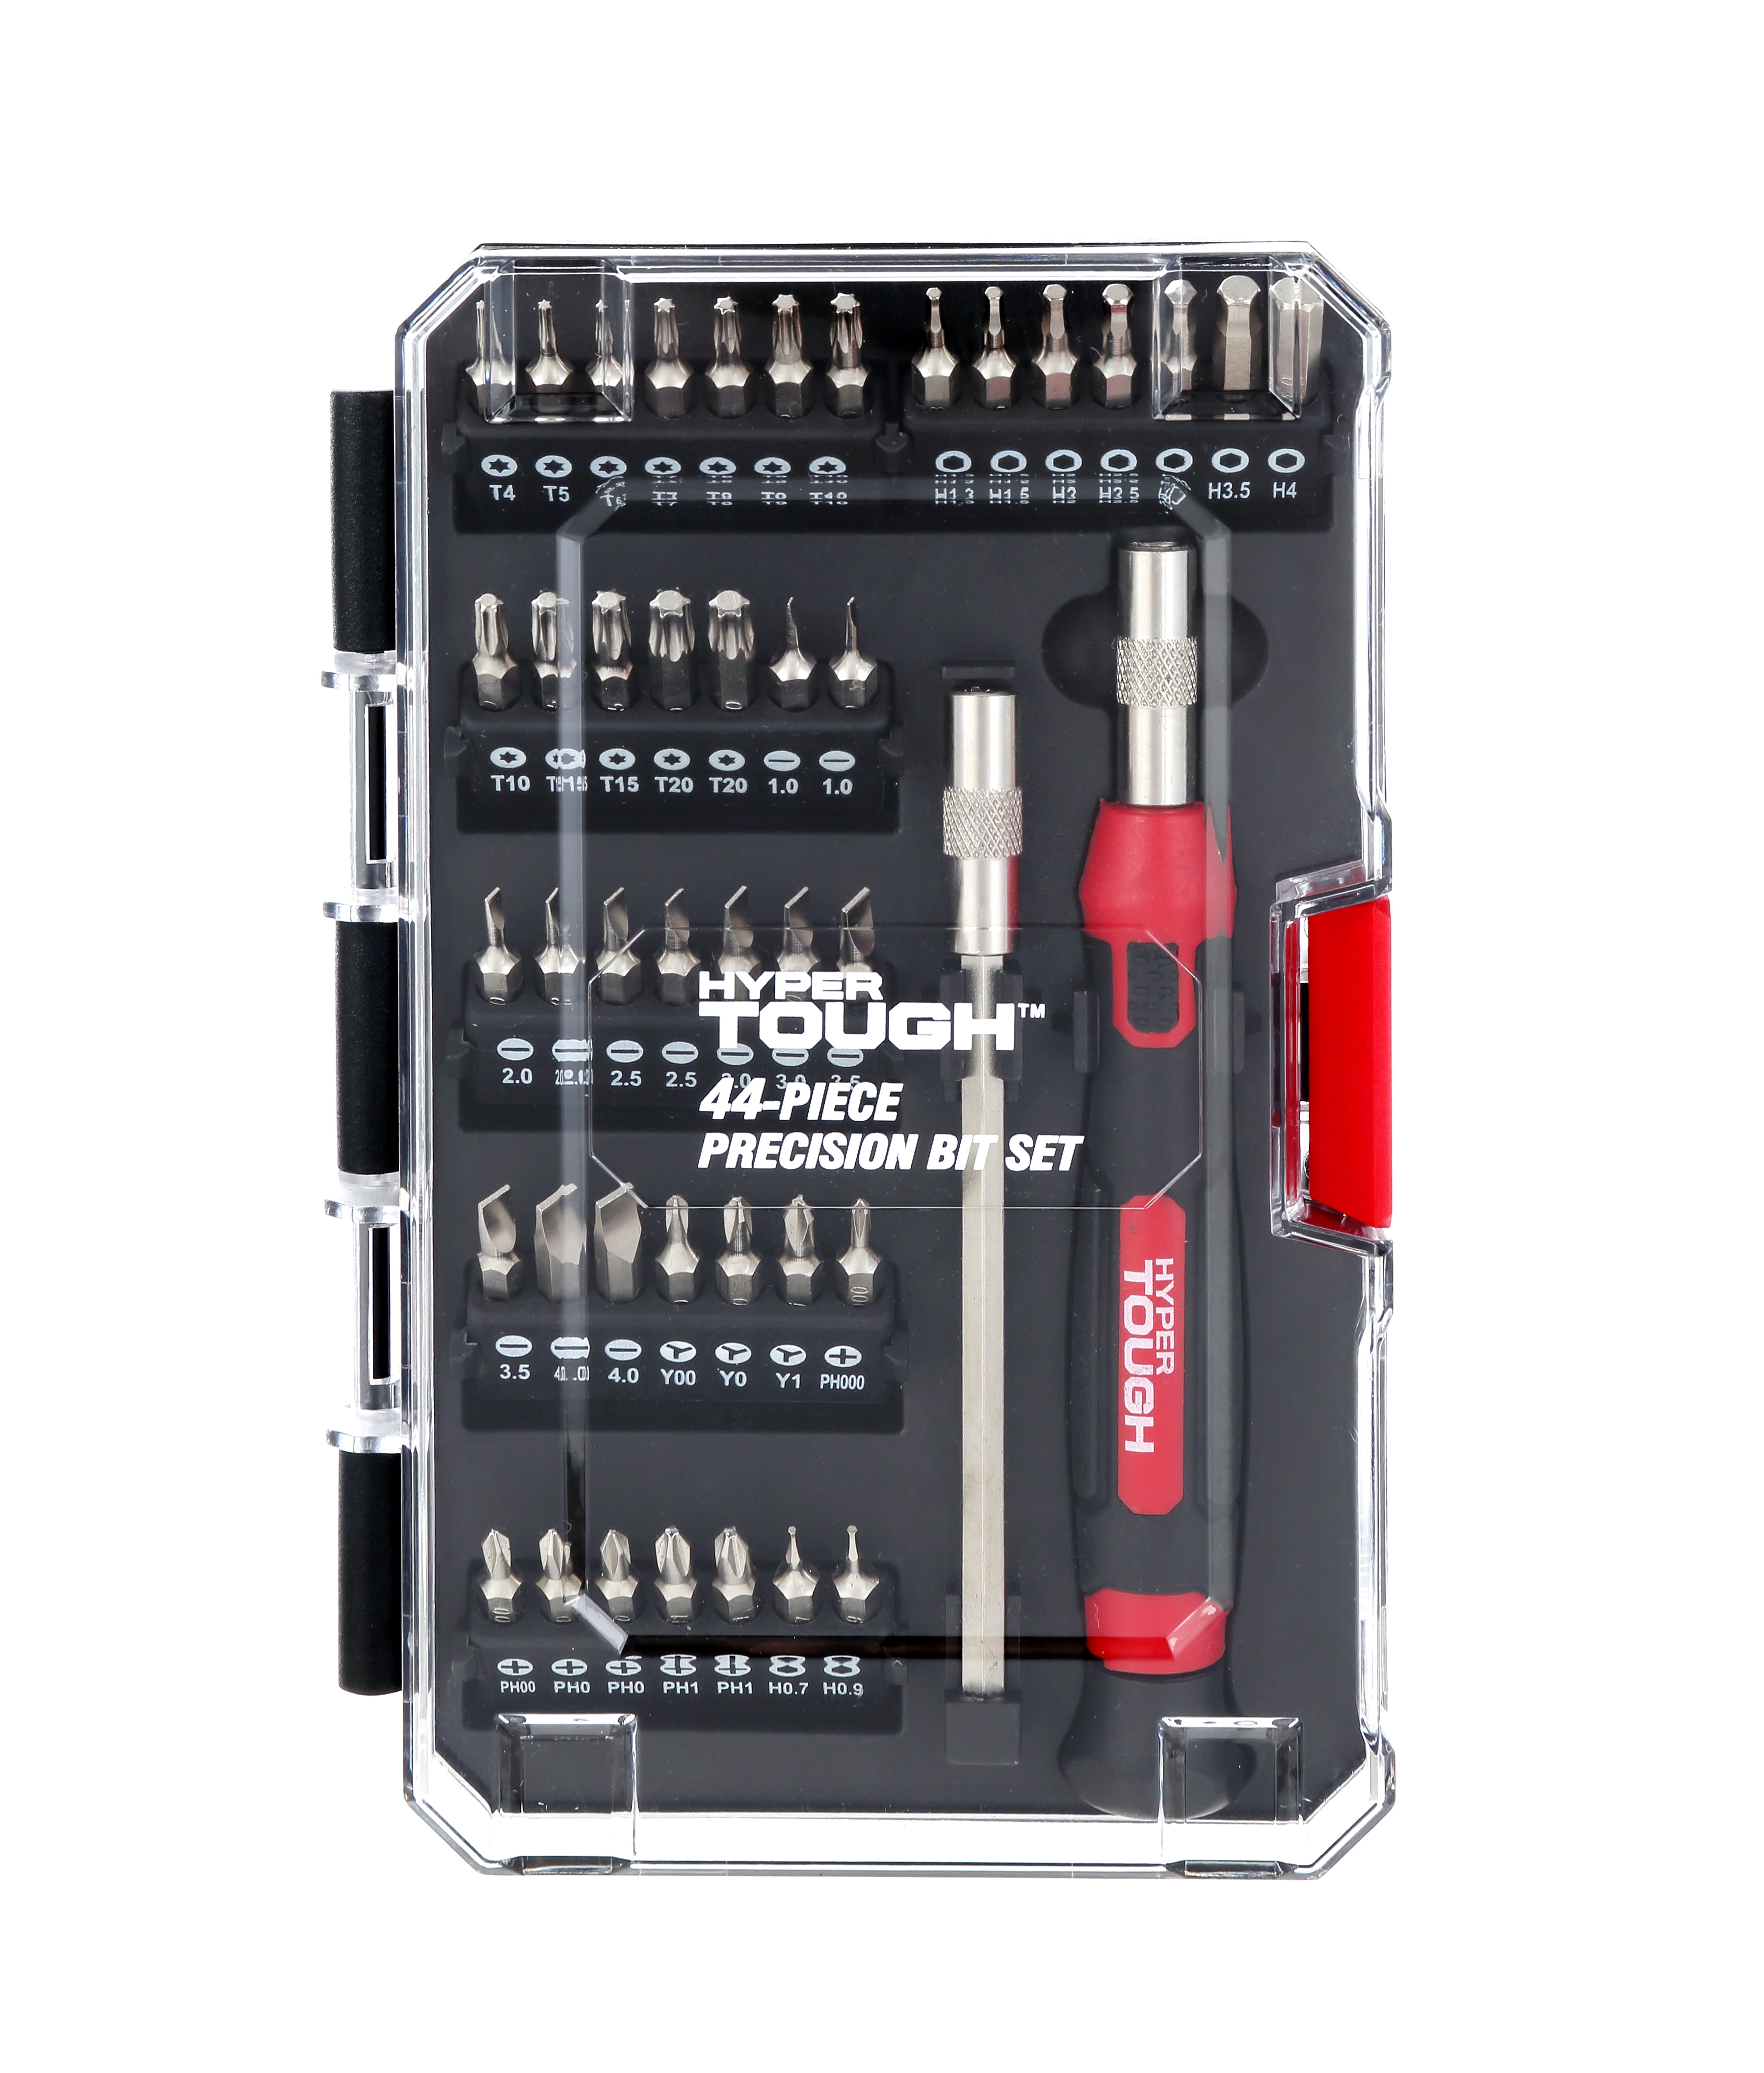 Hyper Tough 77 Piece Precision Tool Kit with Magnetic Screwdriver